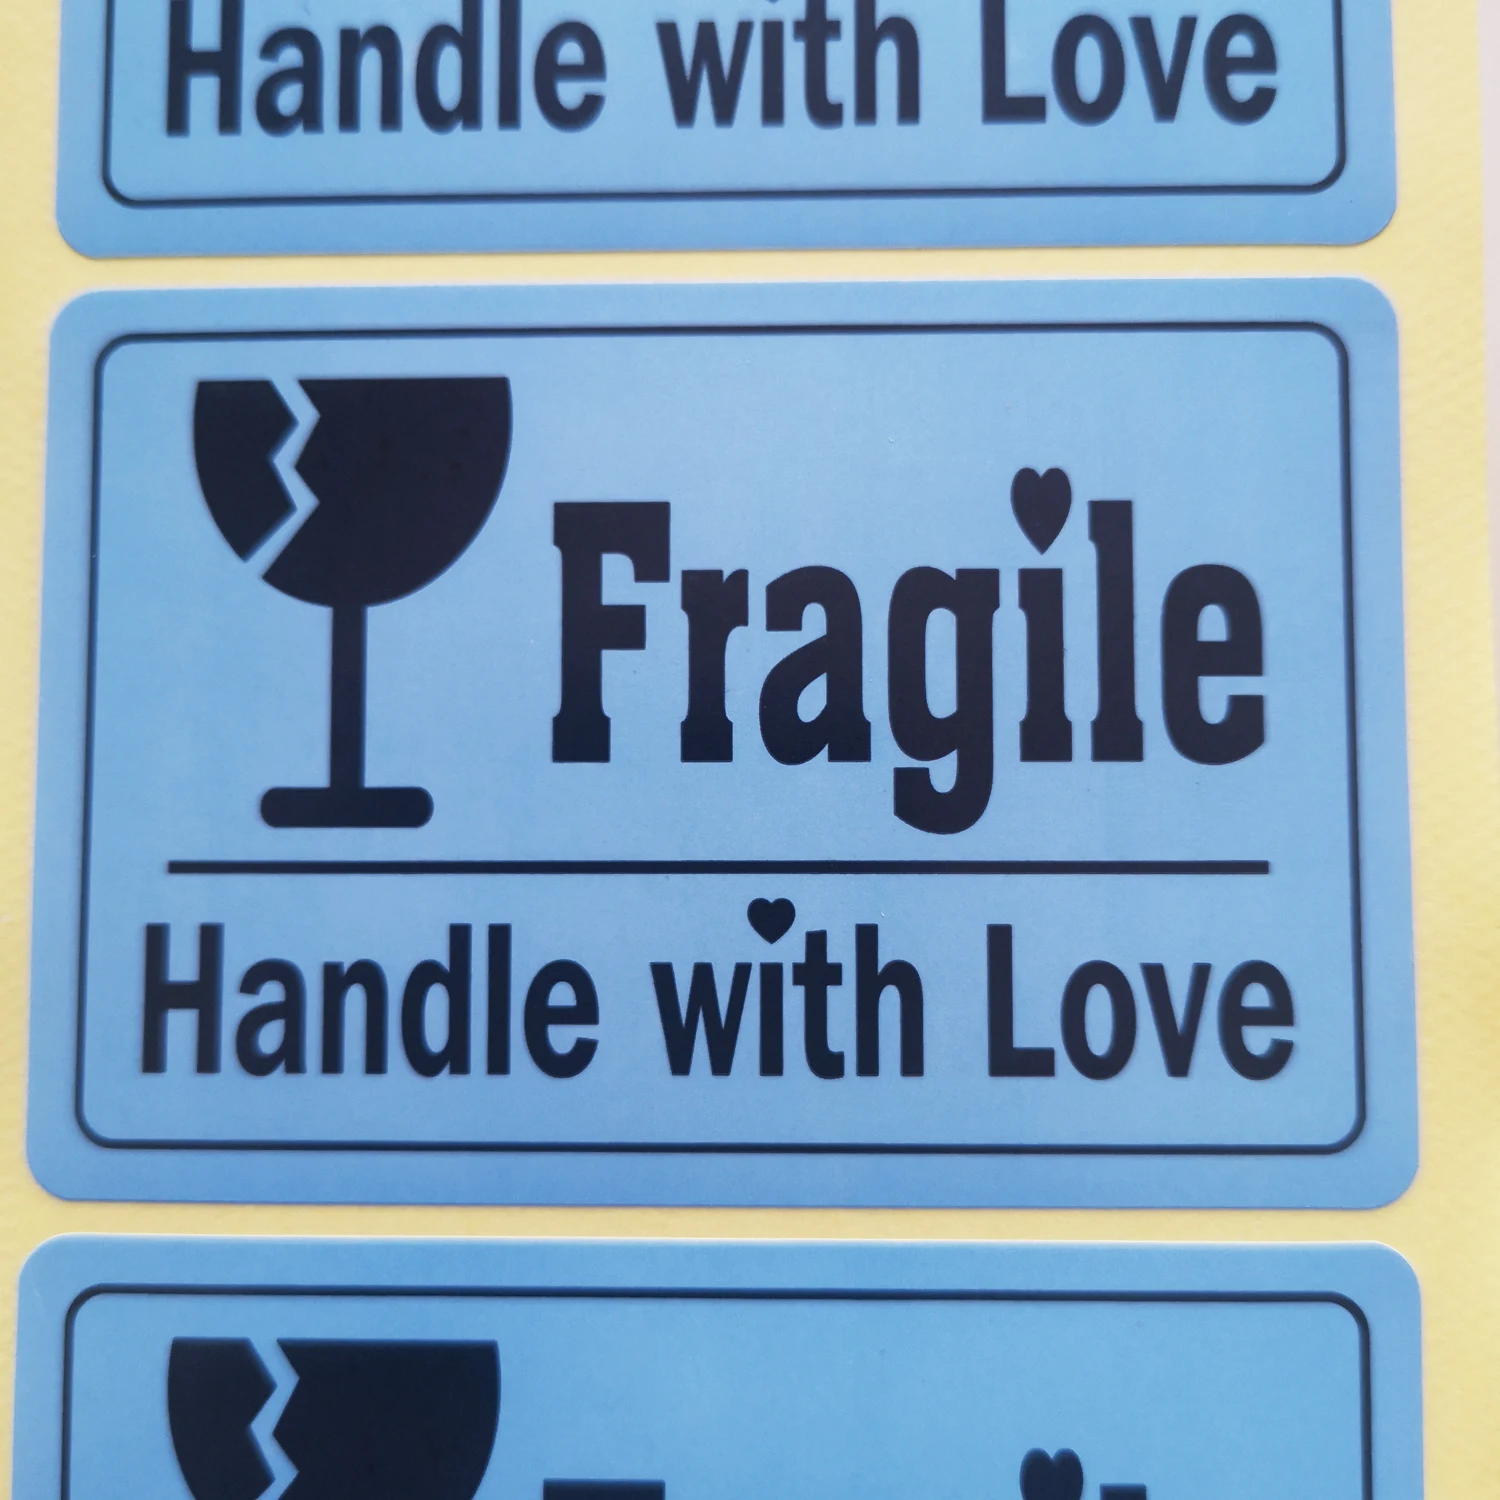 200pcs 76x51mm GLASS FRAGILE HANDLE WITH LOVE Shipping Label Sticker, Item No. SS37